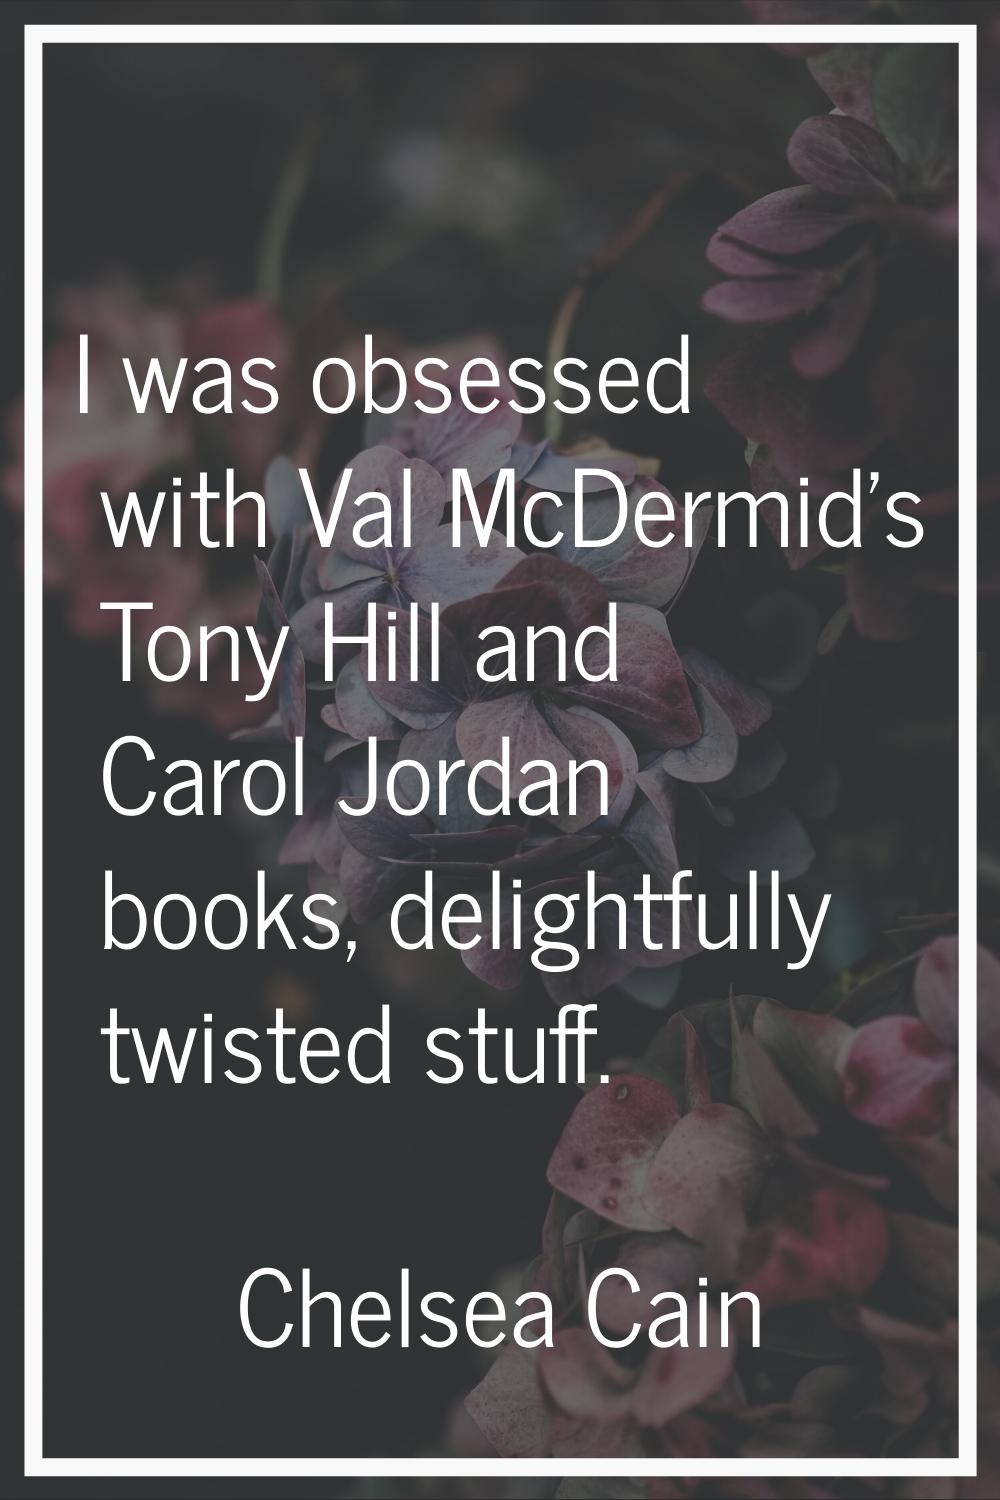 I was obsessed with Val McDermid's Tony Hill and Carol Jordan books, delightfully twisted stuff.